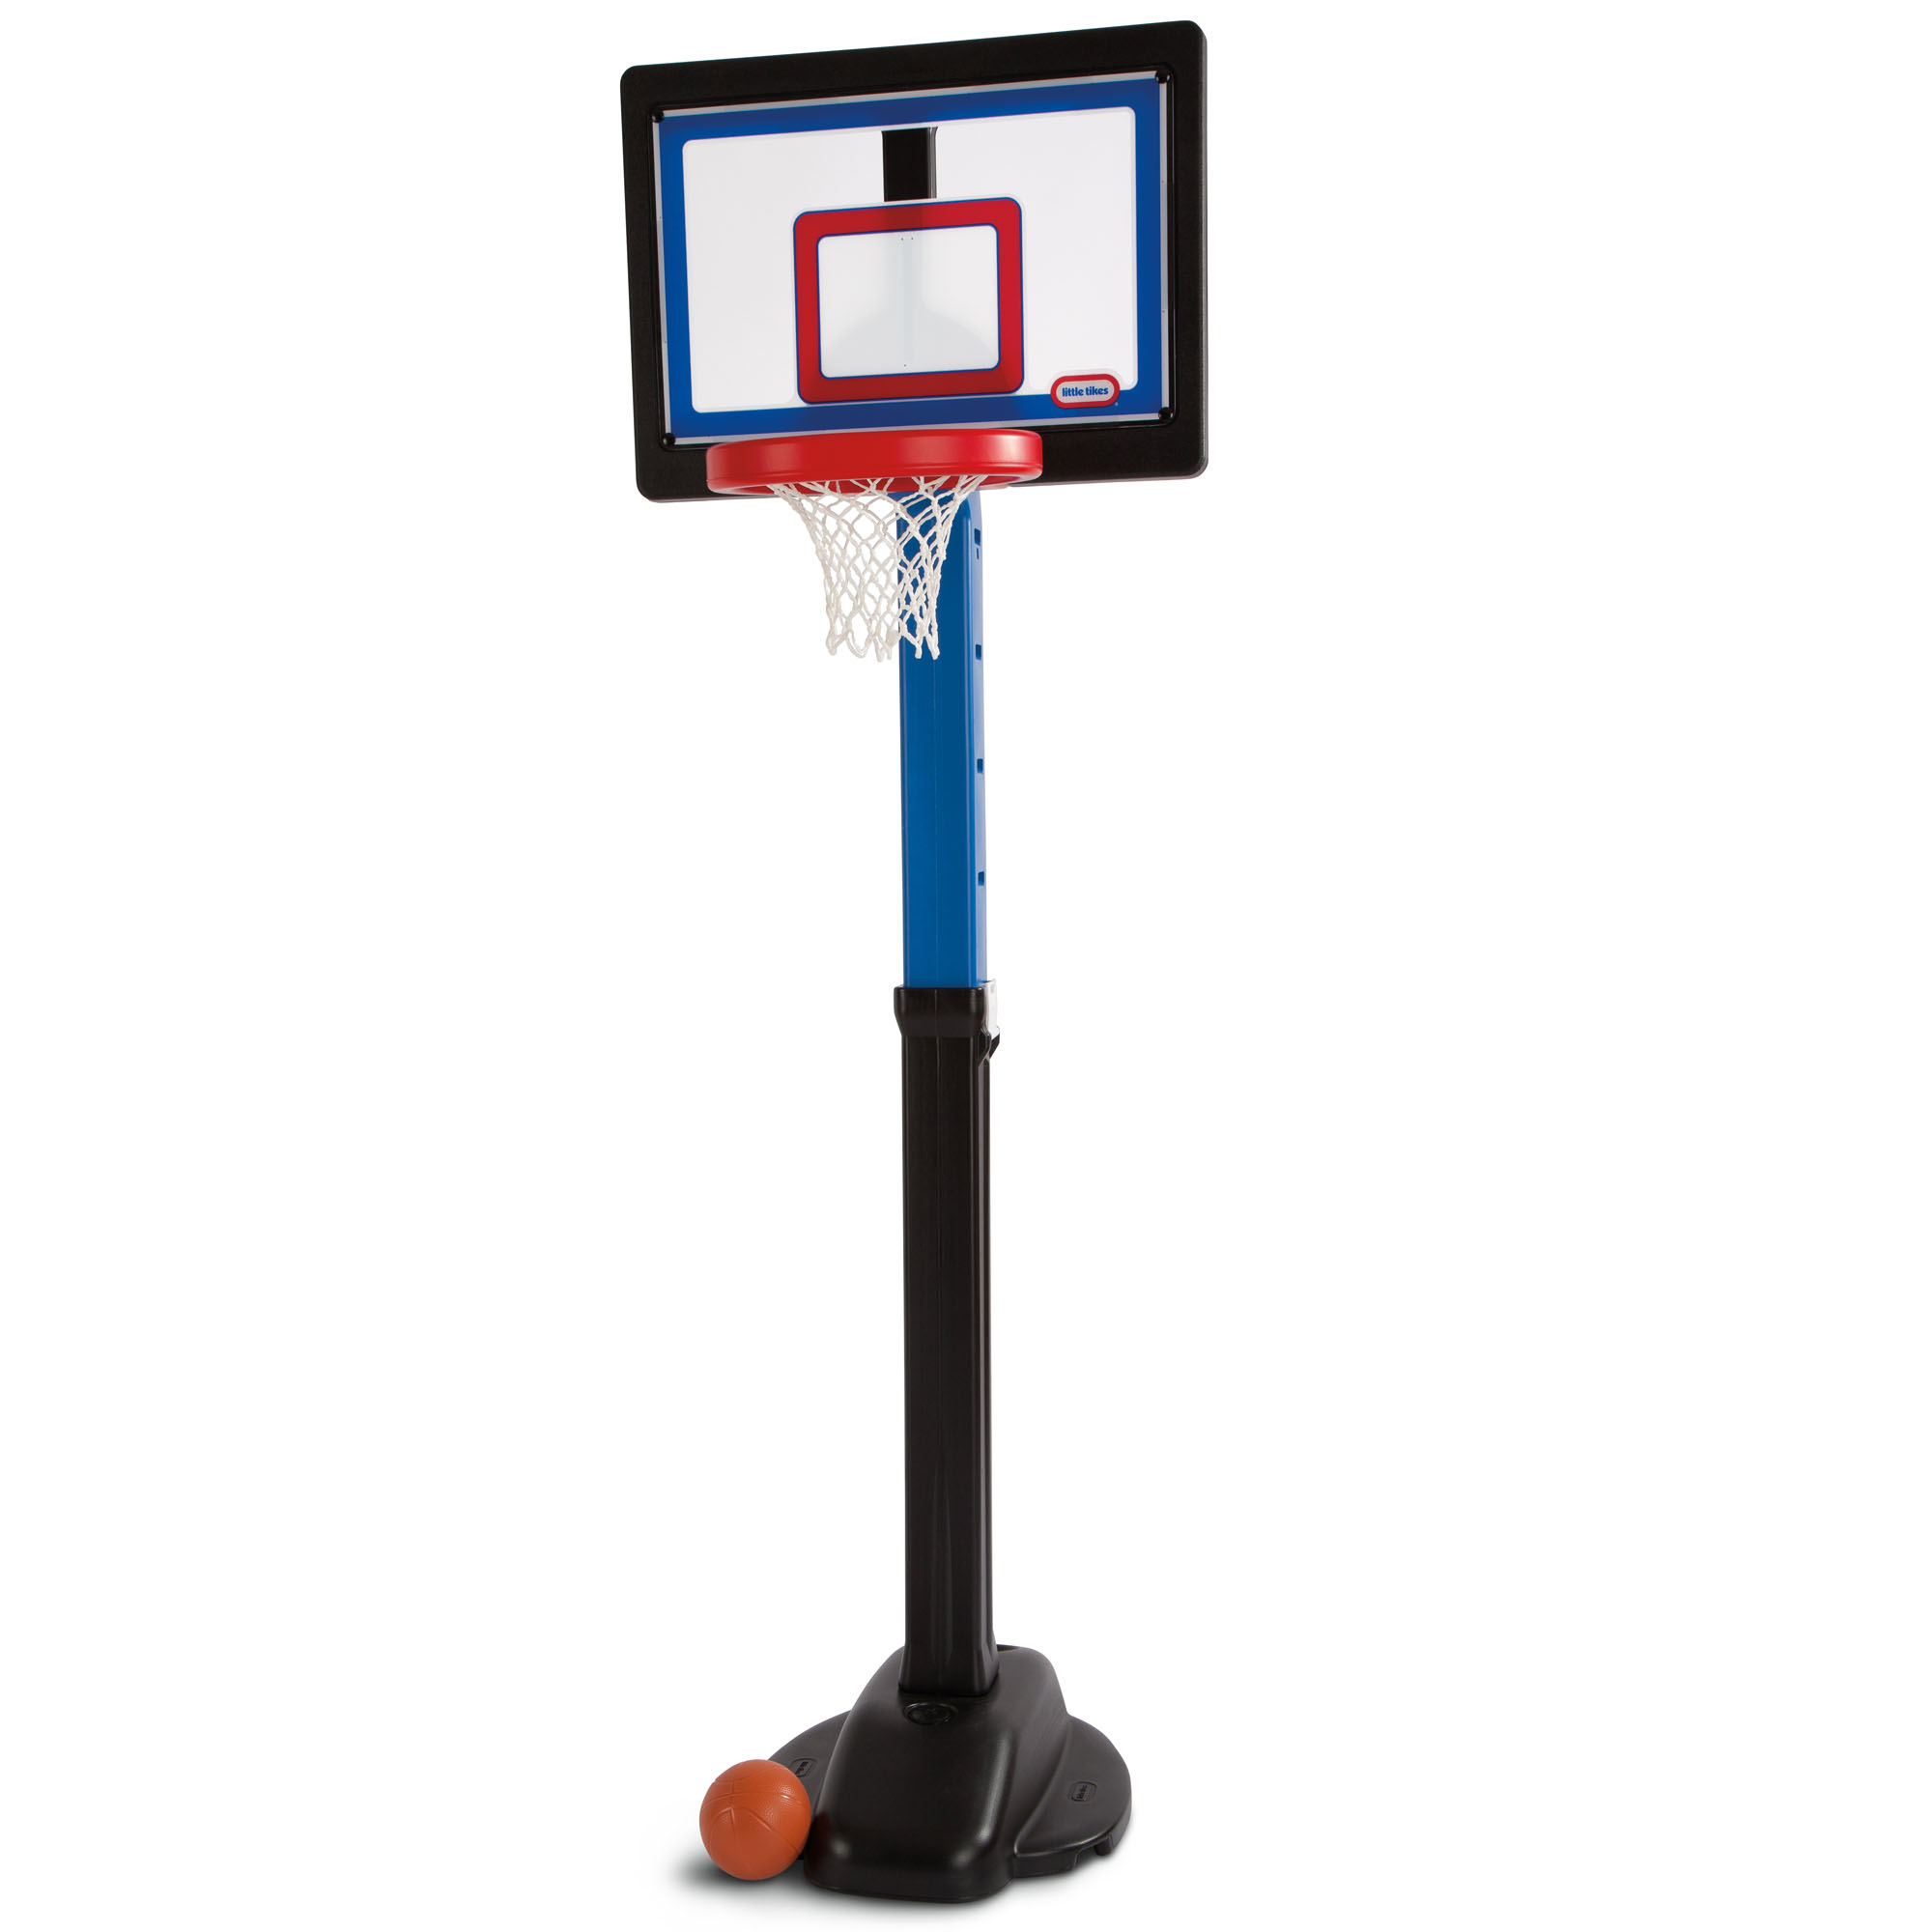 Little Tikes Play Pro Indoor Outdoor Kids Play Toy Portable Basketball Hoop Set - image 3 of 4